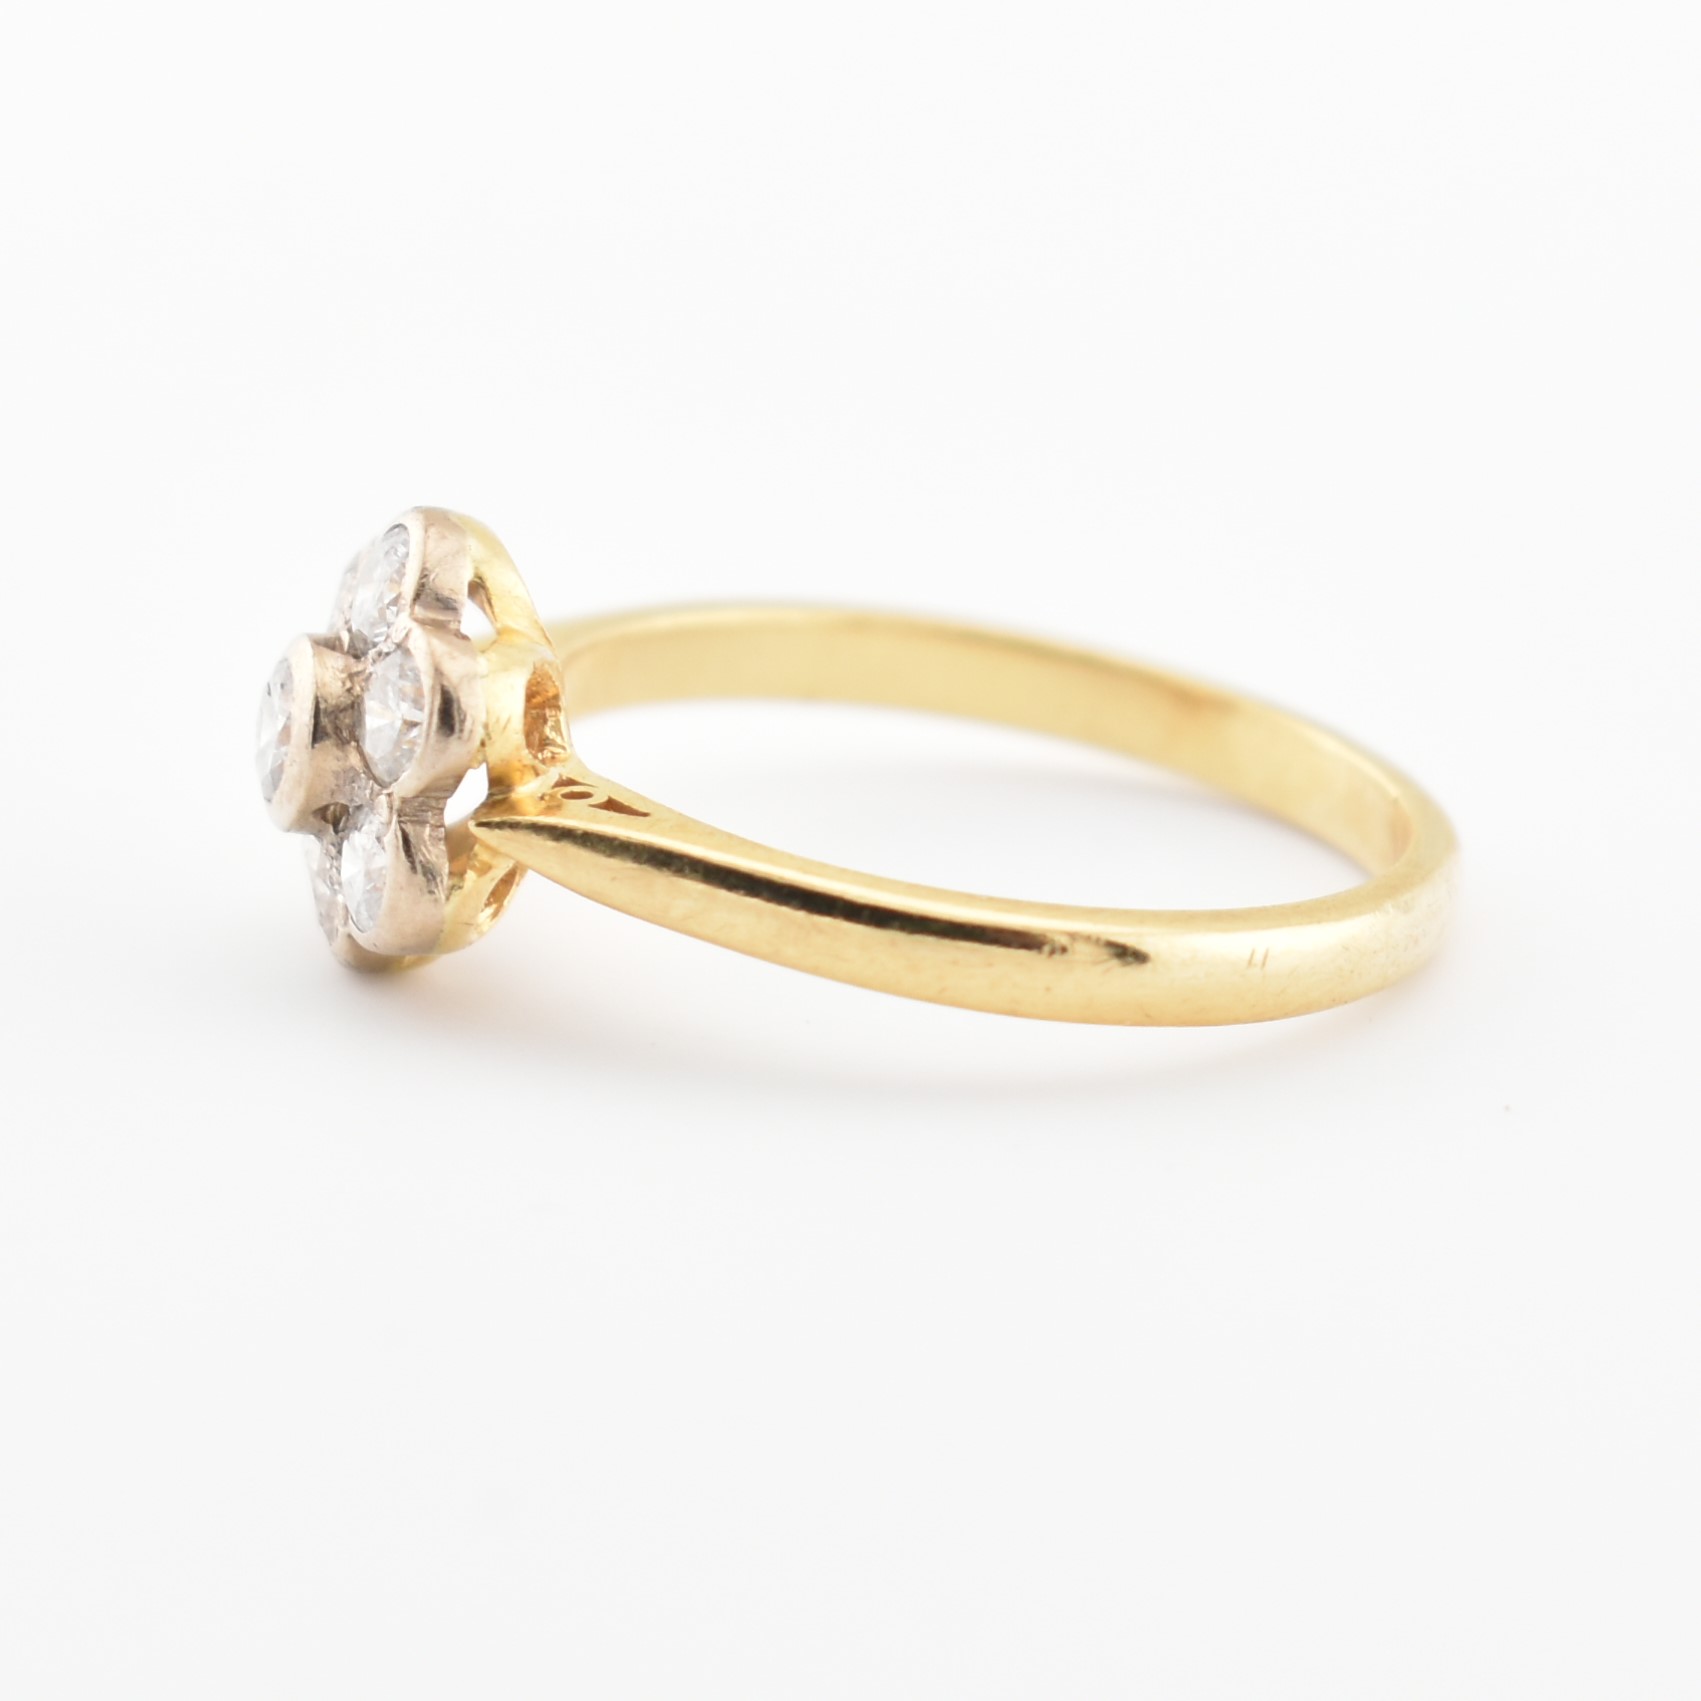 HALLMARKED 18CT GOLD & DIAMOND CLUSTER RING - Image 5 of 6